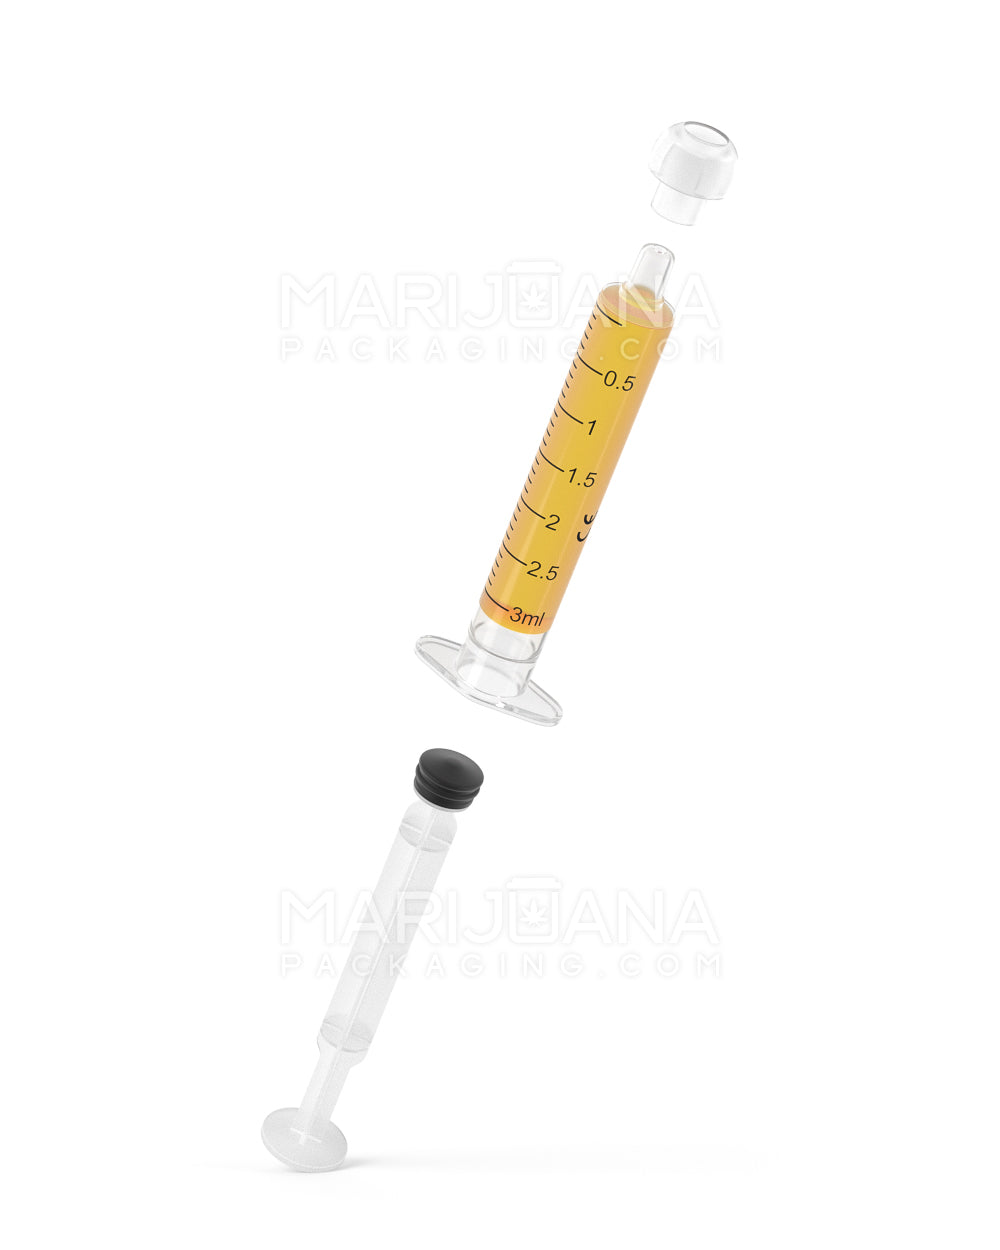 Plastic Oral Concentrate Syringes | 3mL - 0.5mL Increments | Sample - 7